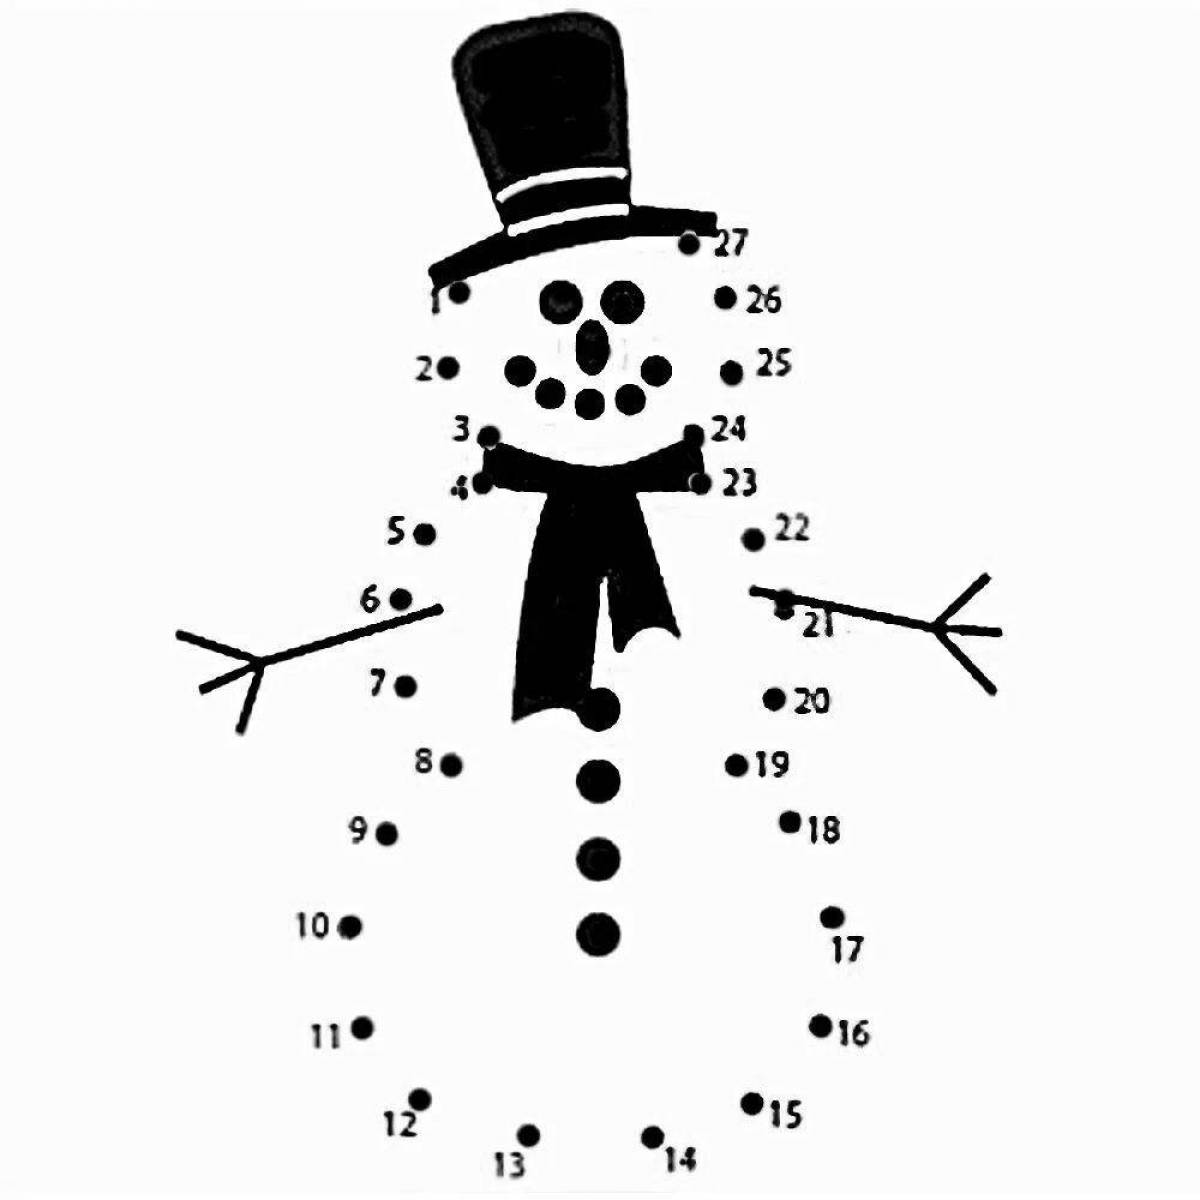 Dazzling snowman coloring by numbers